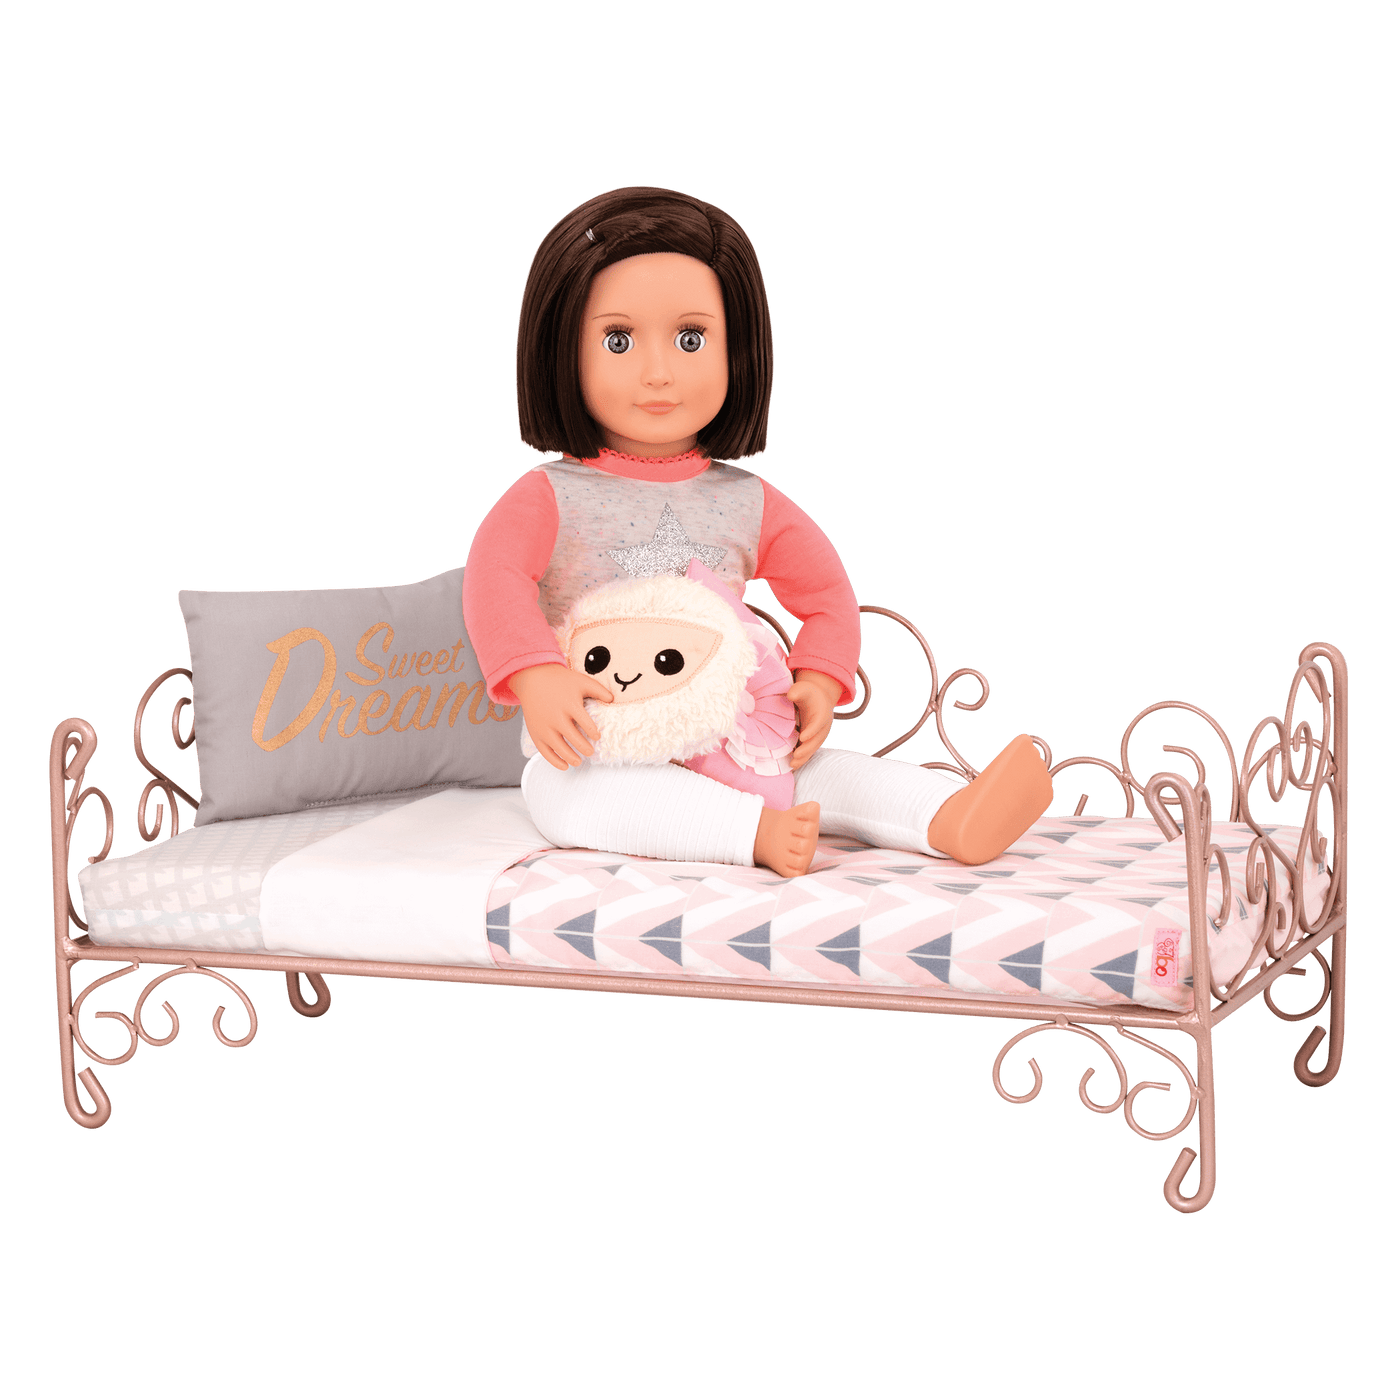 Sweet Dreams Scrollwork Bed with Everly